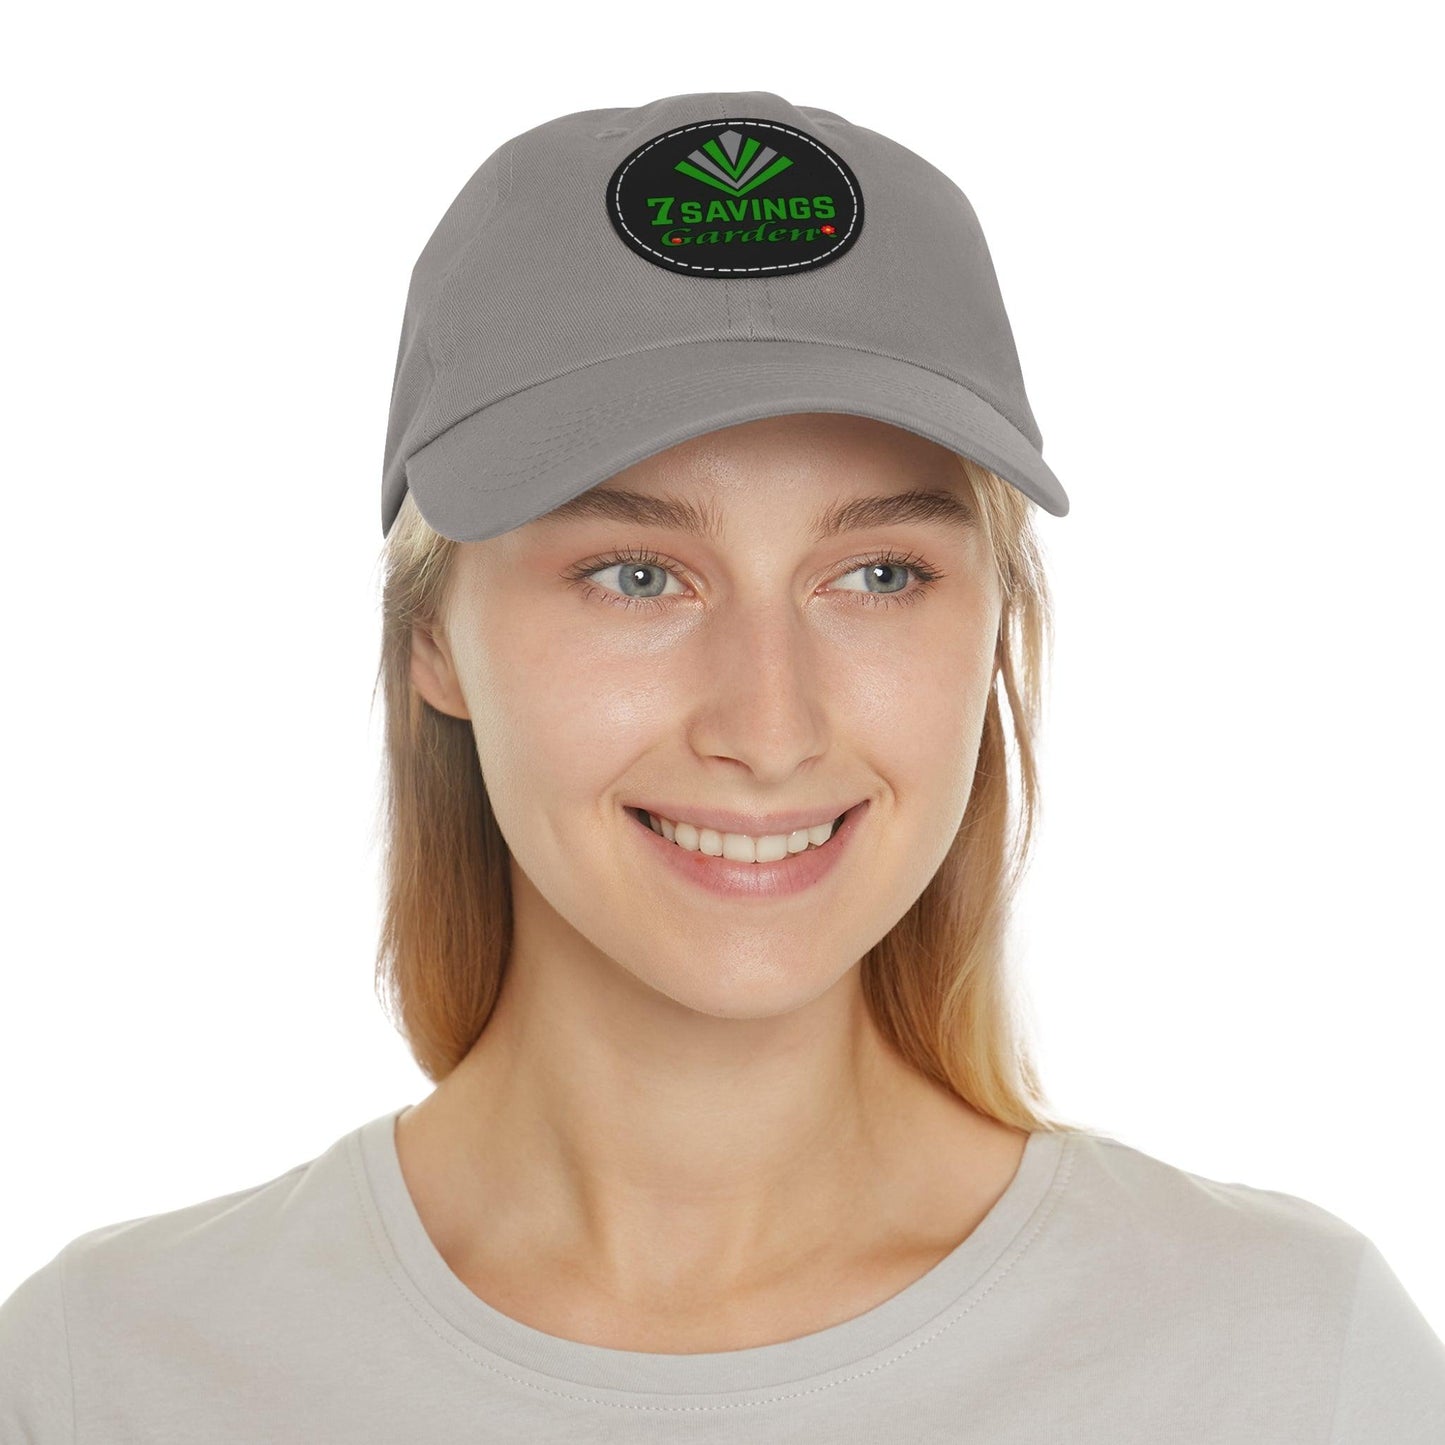 7savings Dad Hat with Leather Patch (Round) Plant lover hat